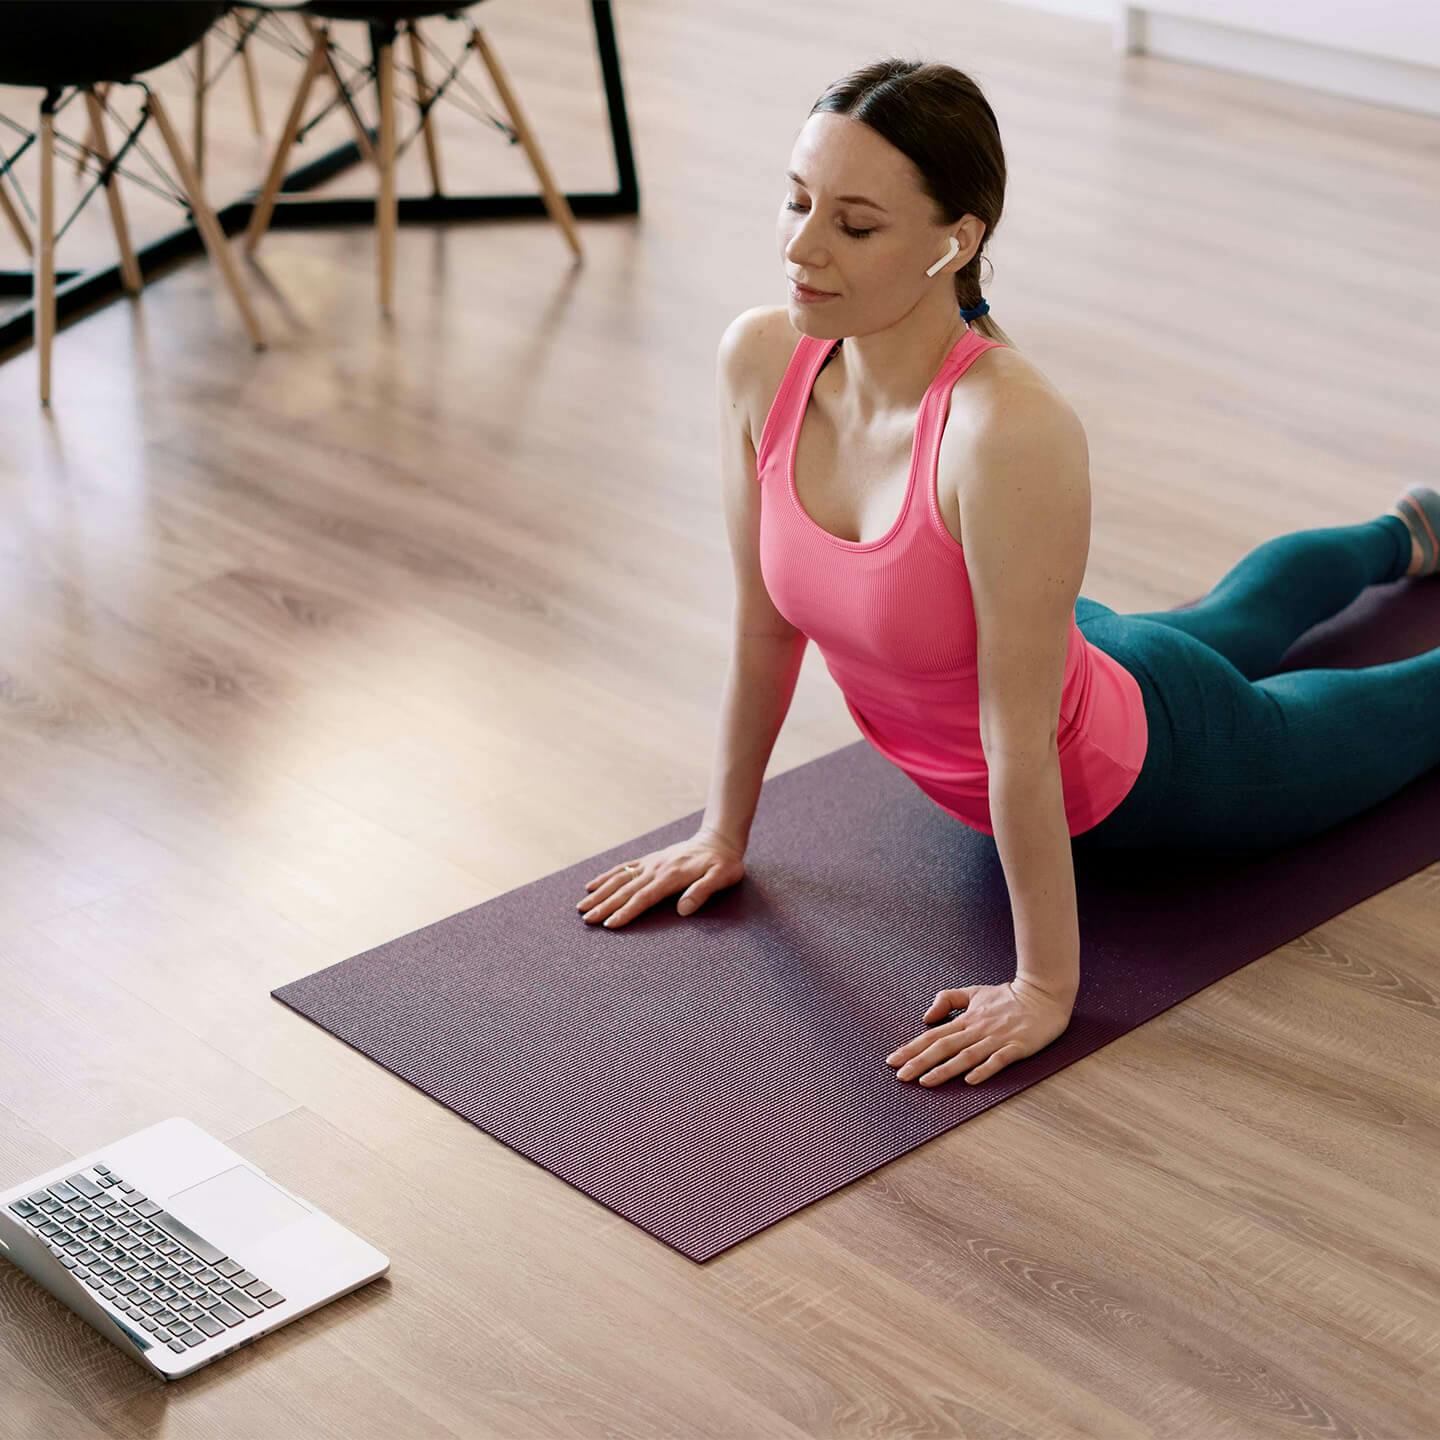 Woman in a yoga post on a purple mat